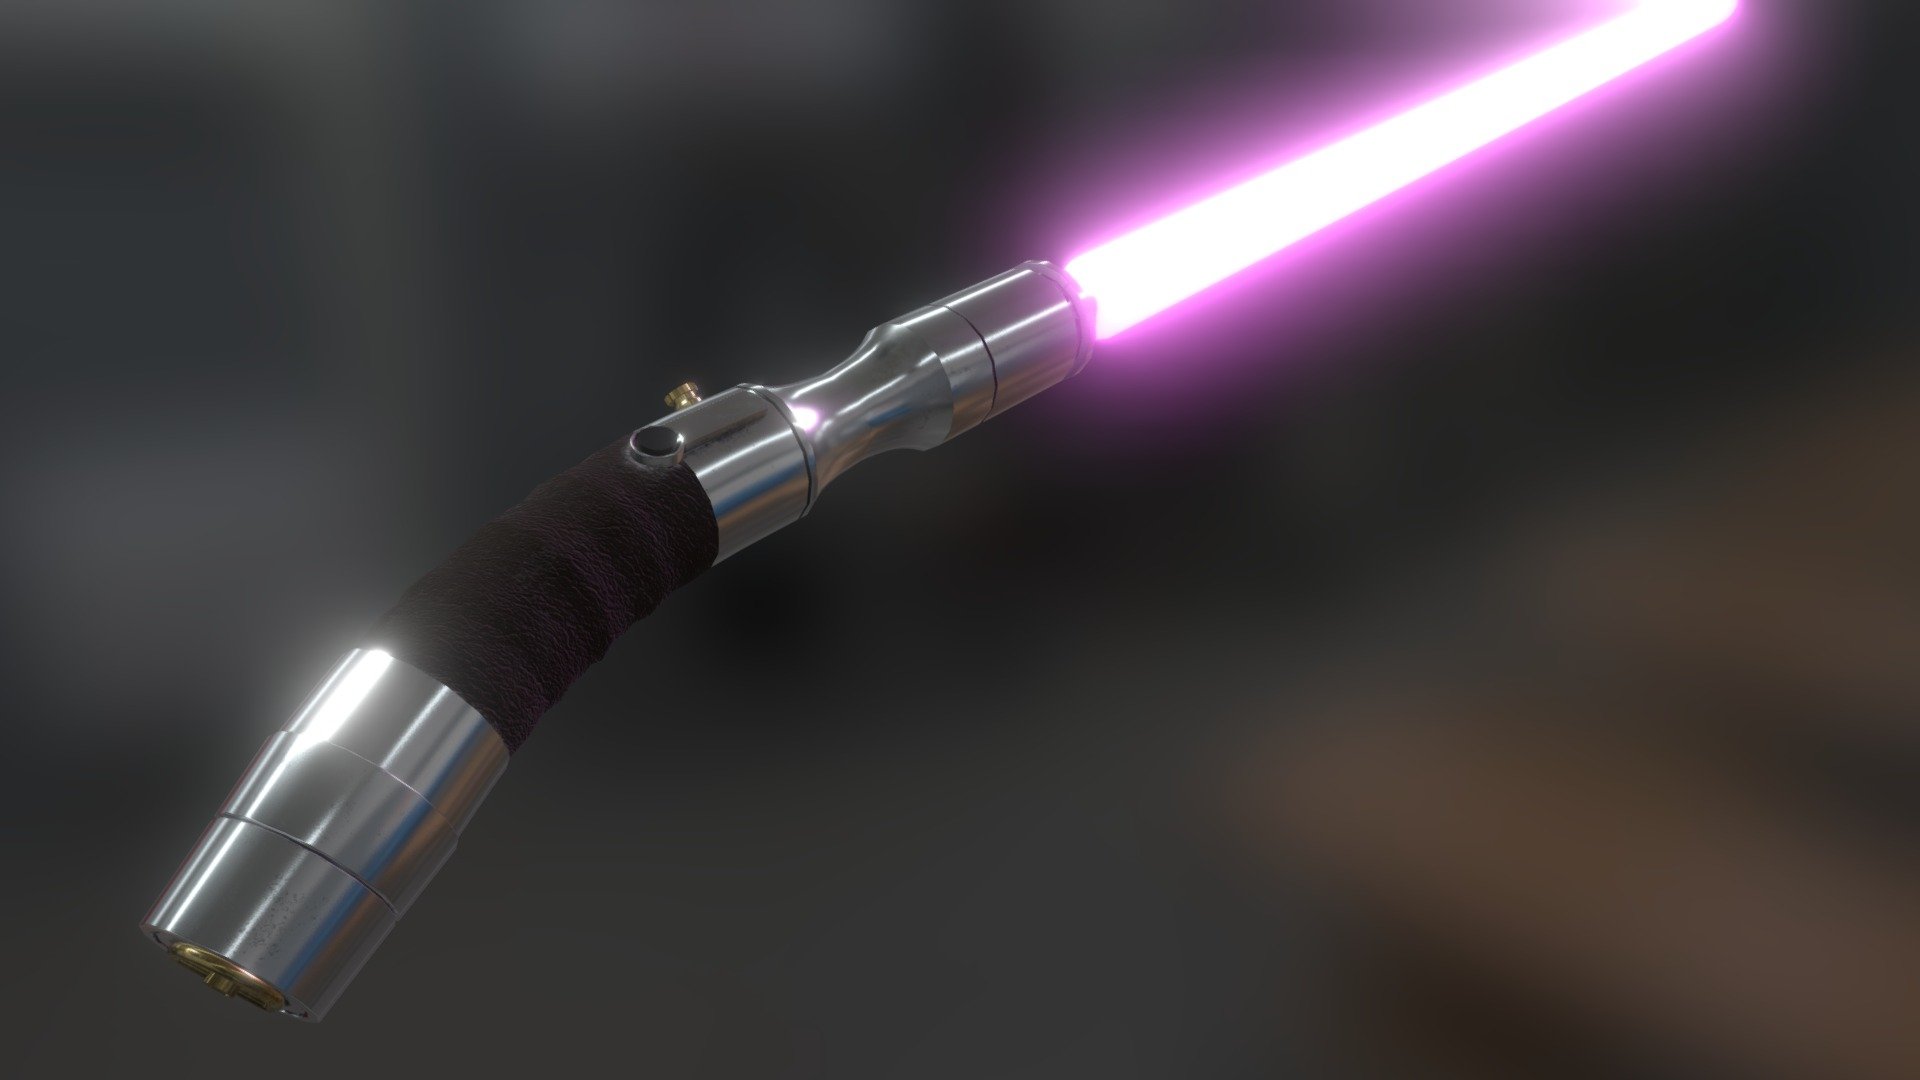 Introducing the Incredible Curved Lightsaber: The Latest Game Upgrade You Won't Want to Miss